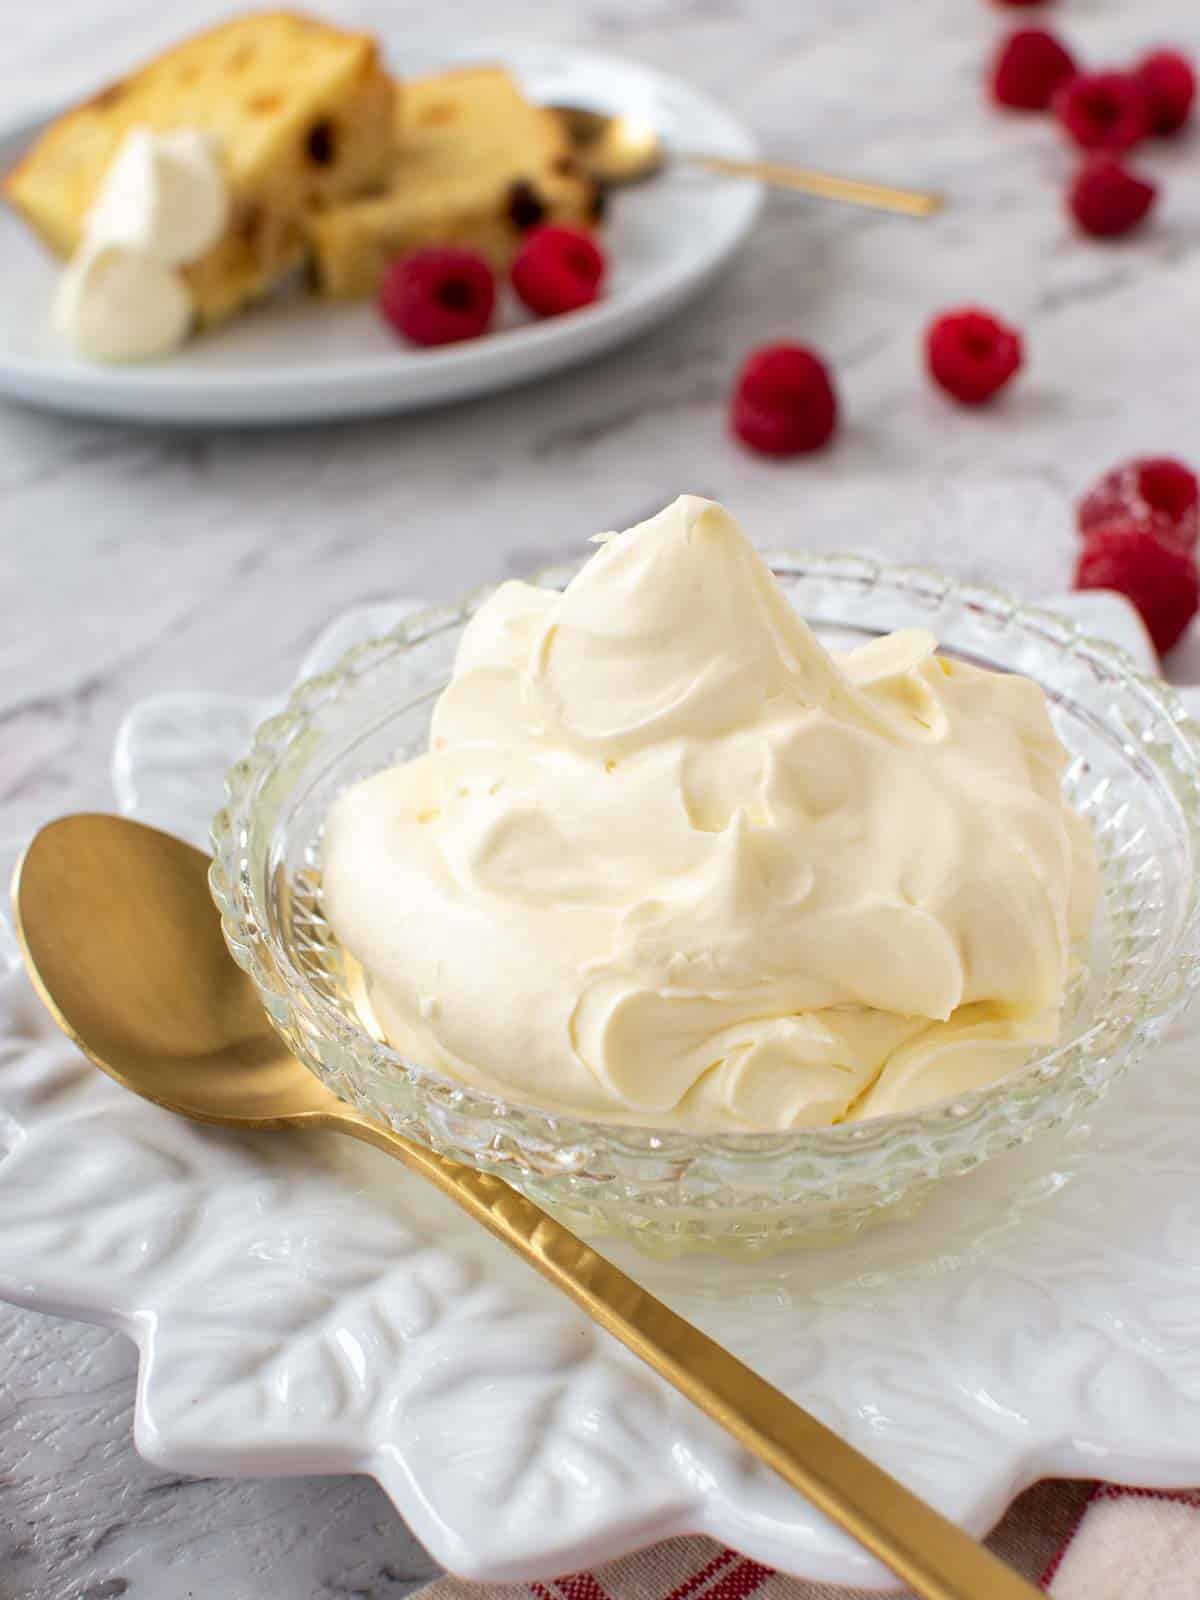 mascarpone cream in a bowl with gold spoon, raspberries scattered around and plate with cake and cream in the background.